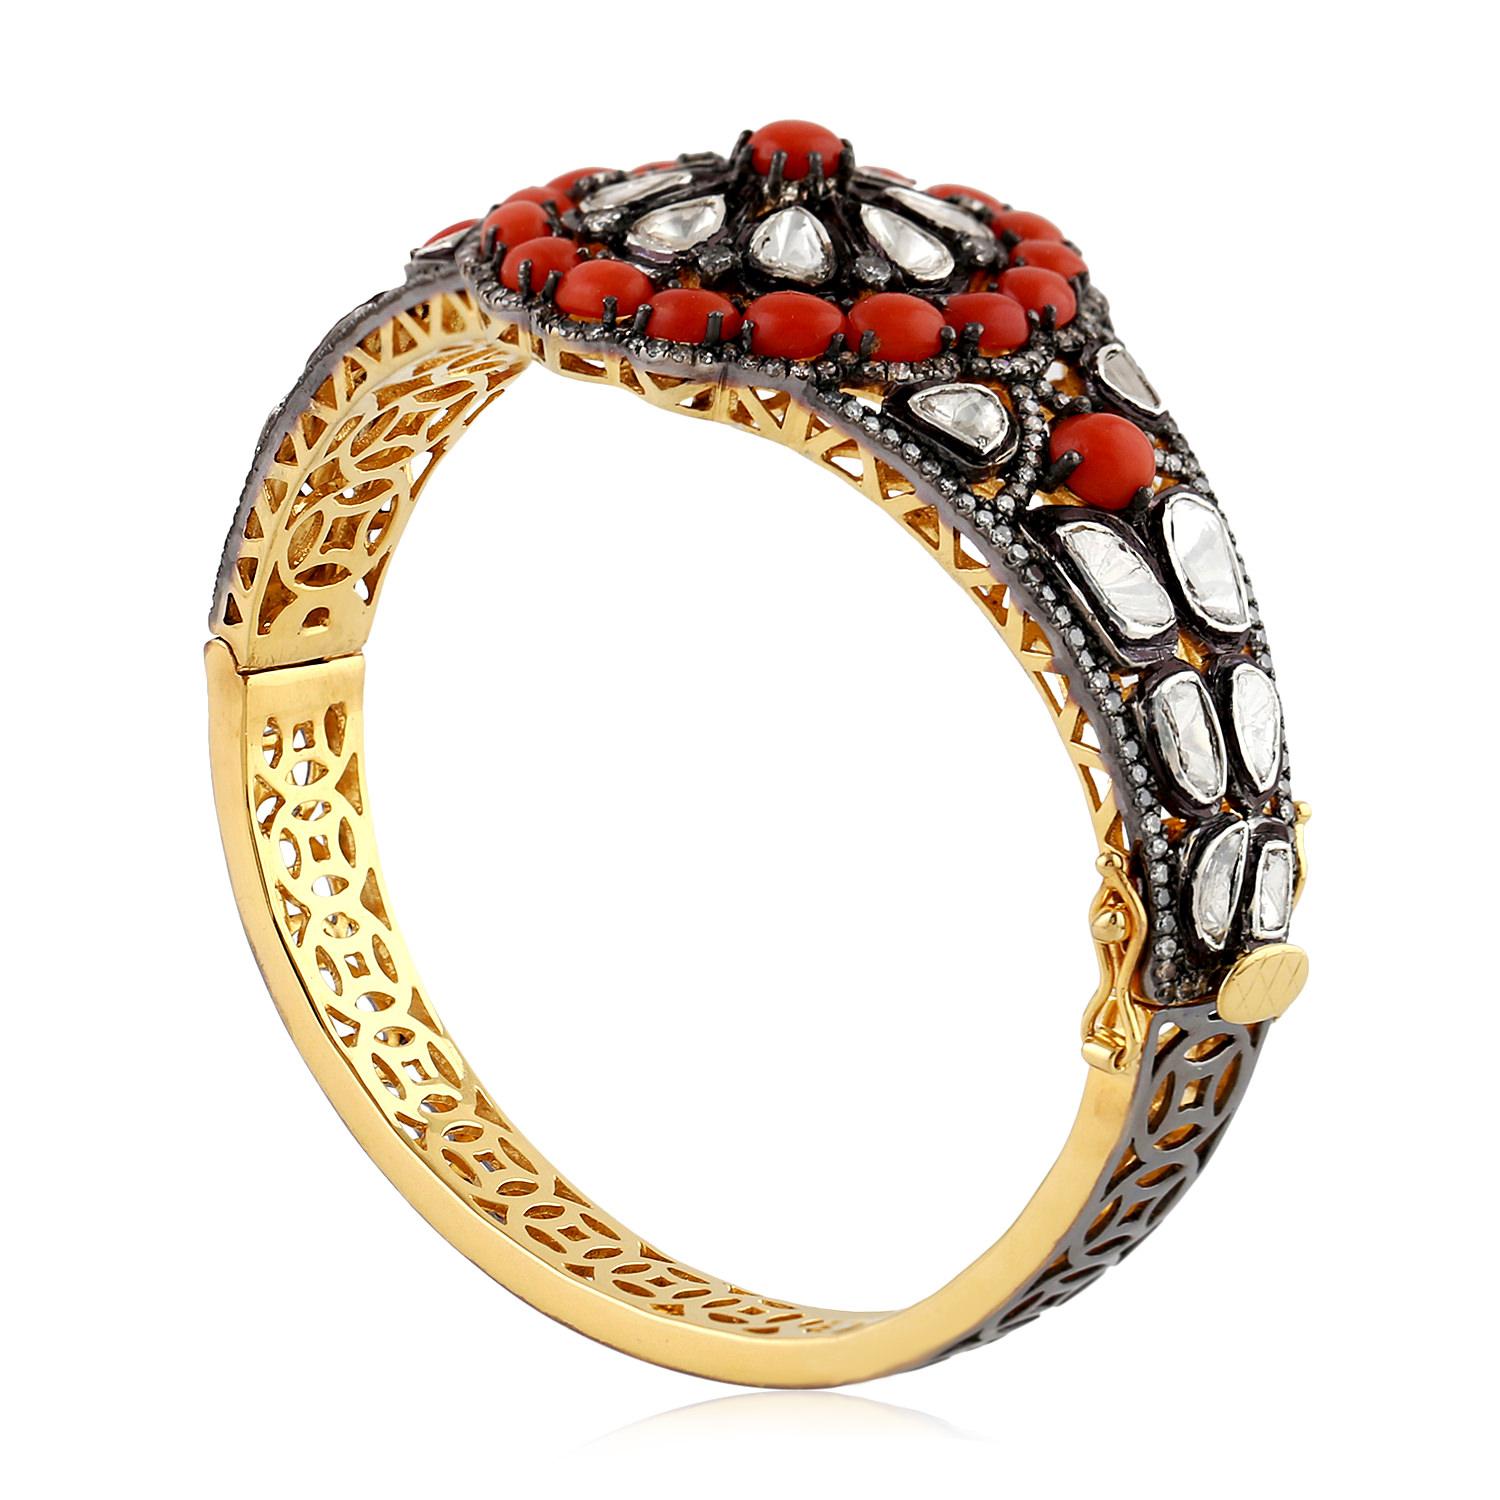 Pretty in coral, this floral designer bangle in rosecut diamond and coral is perfect for any occasion. As this bangle is openbale and oval in shape it sits on the wrist perfectly.

Closure: Box Clasp with safety clasp

18KT: 2.284gms
Diamond: